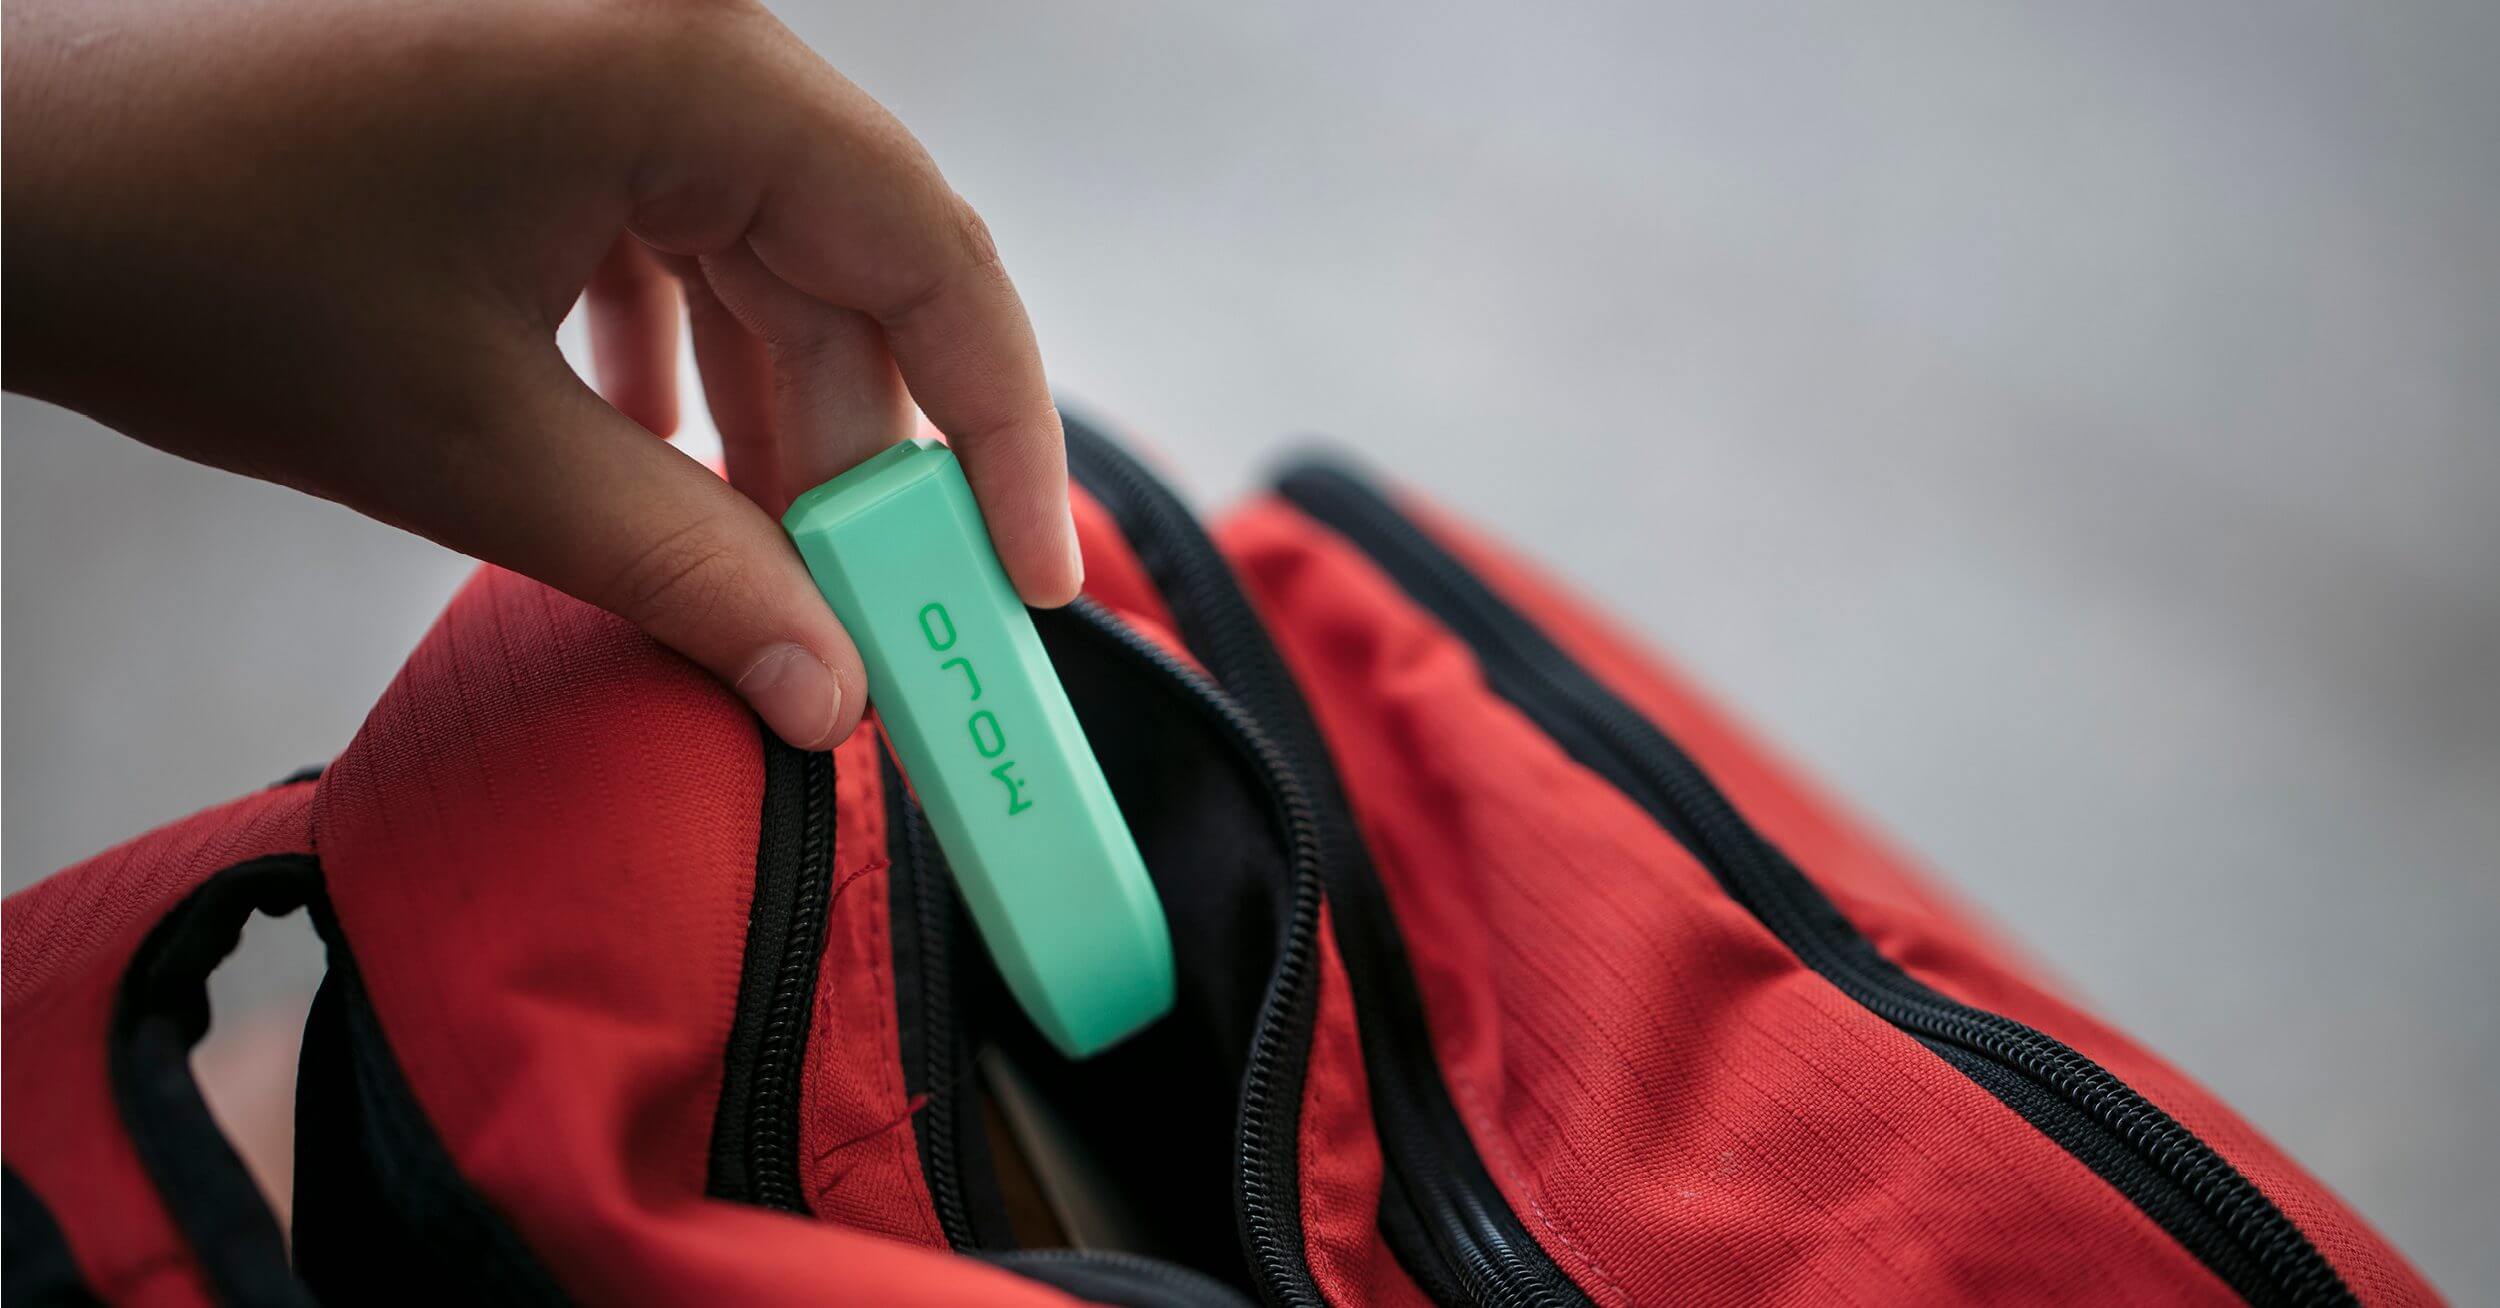 Smokeless tobacco device in backpack